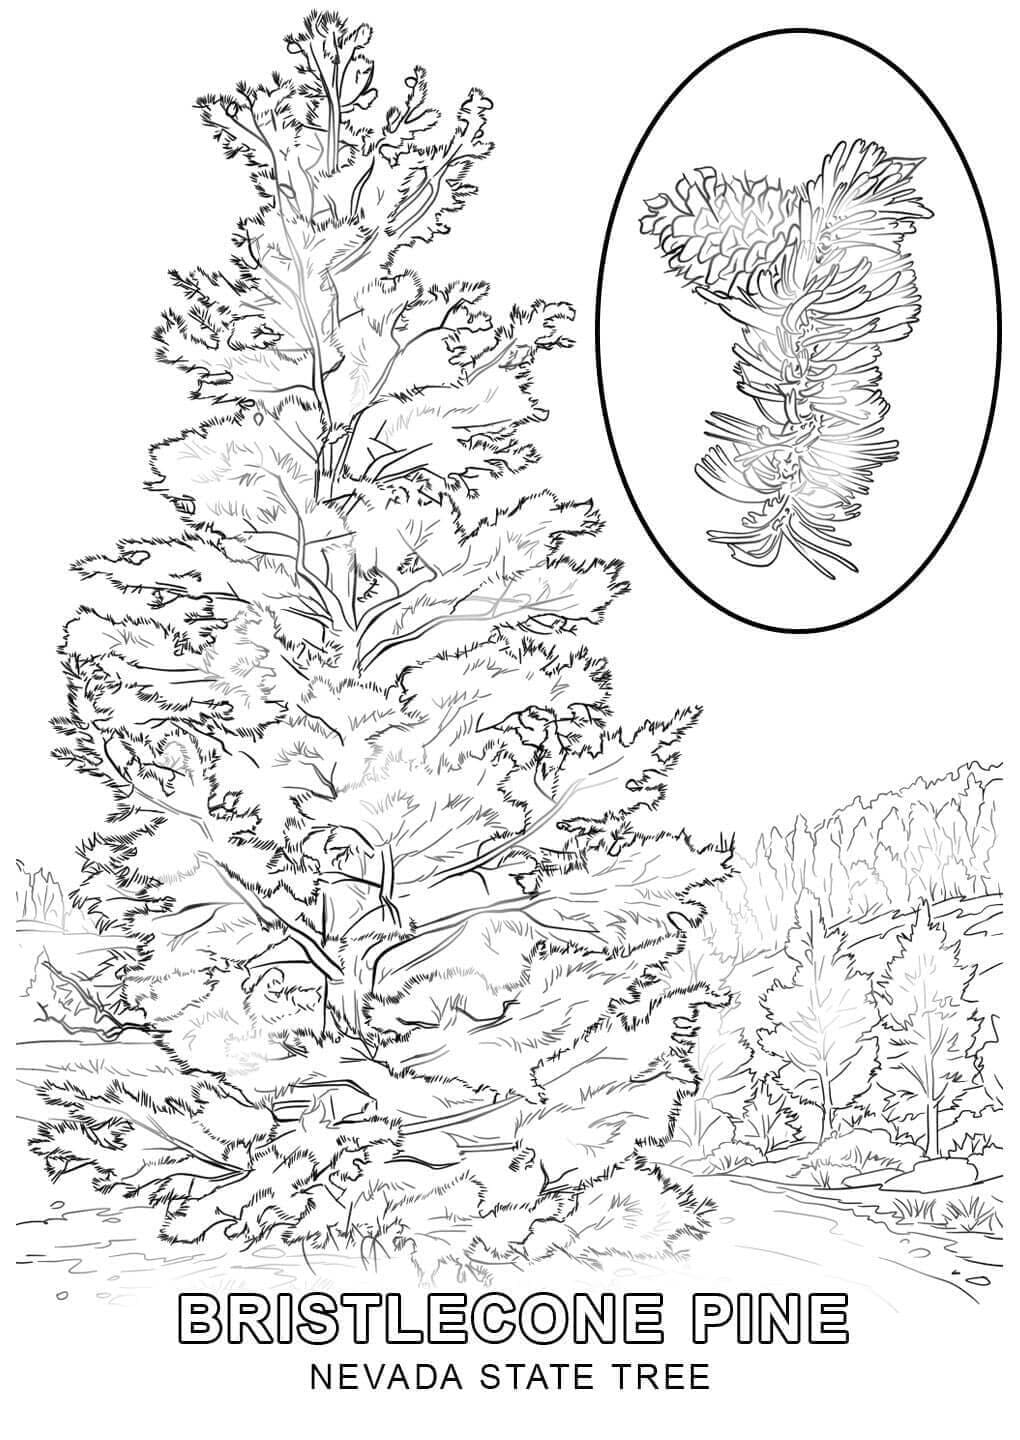 Nevada state pine tree coloring page